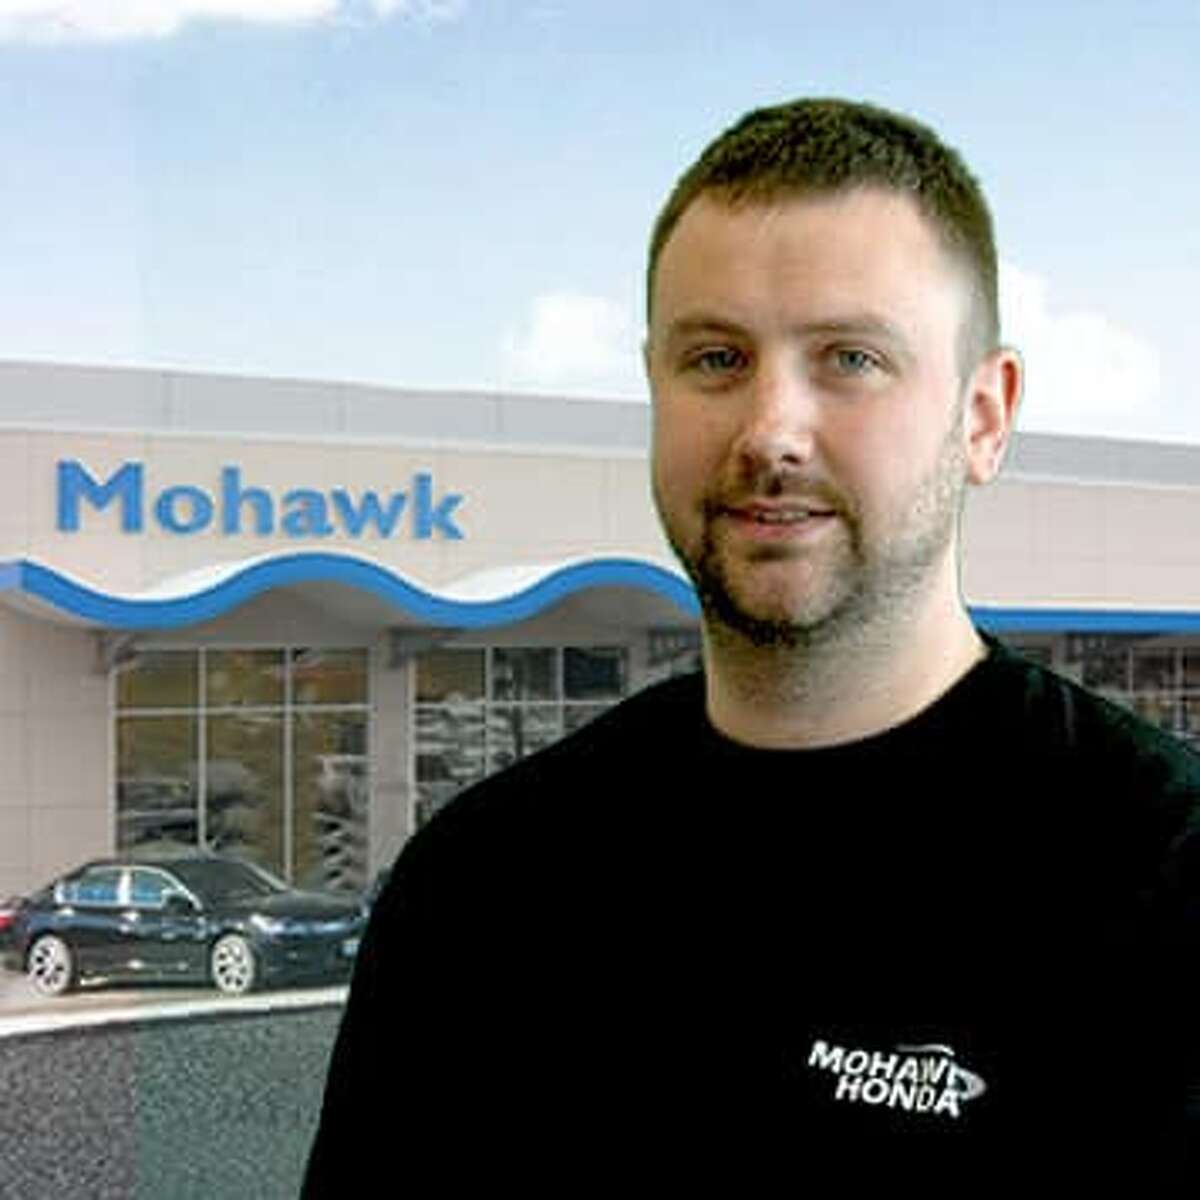 Derrick Anderson, master technician at Mohawk Honda and an 18-year veteran at the Schenectady business, says he likes his work because "I’ve been able to learn and work my way up through the years."